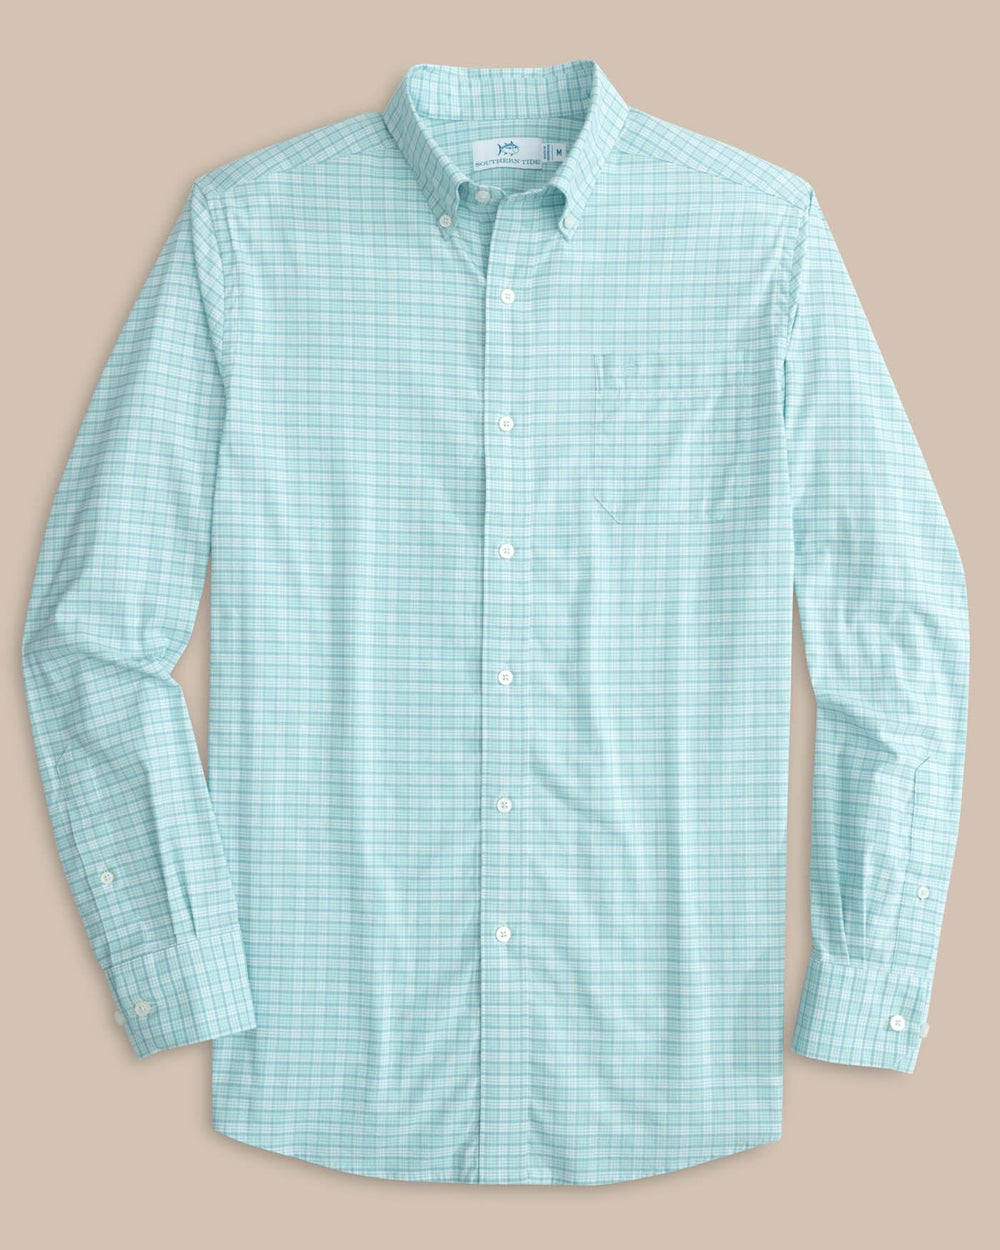 The front view of the Southern Tide Coastal Passage Trailside Plaid Long Sleeve Sport Shirt by Southern Tide - Wake Blue